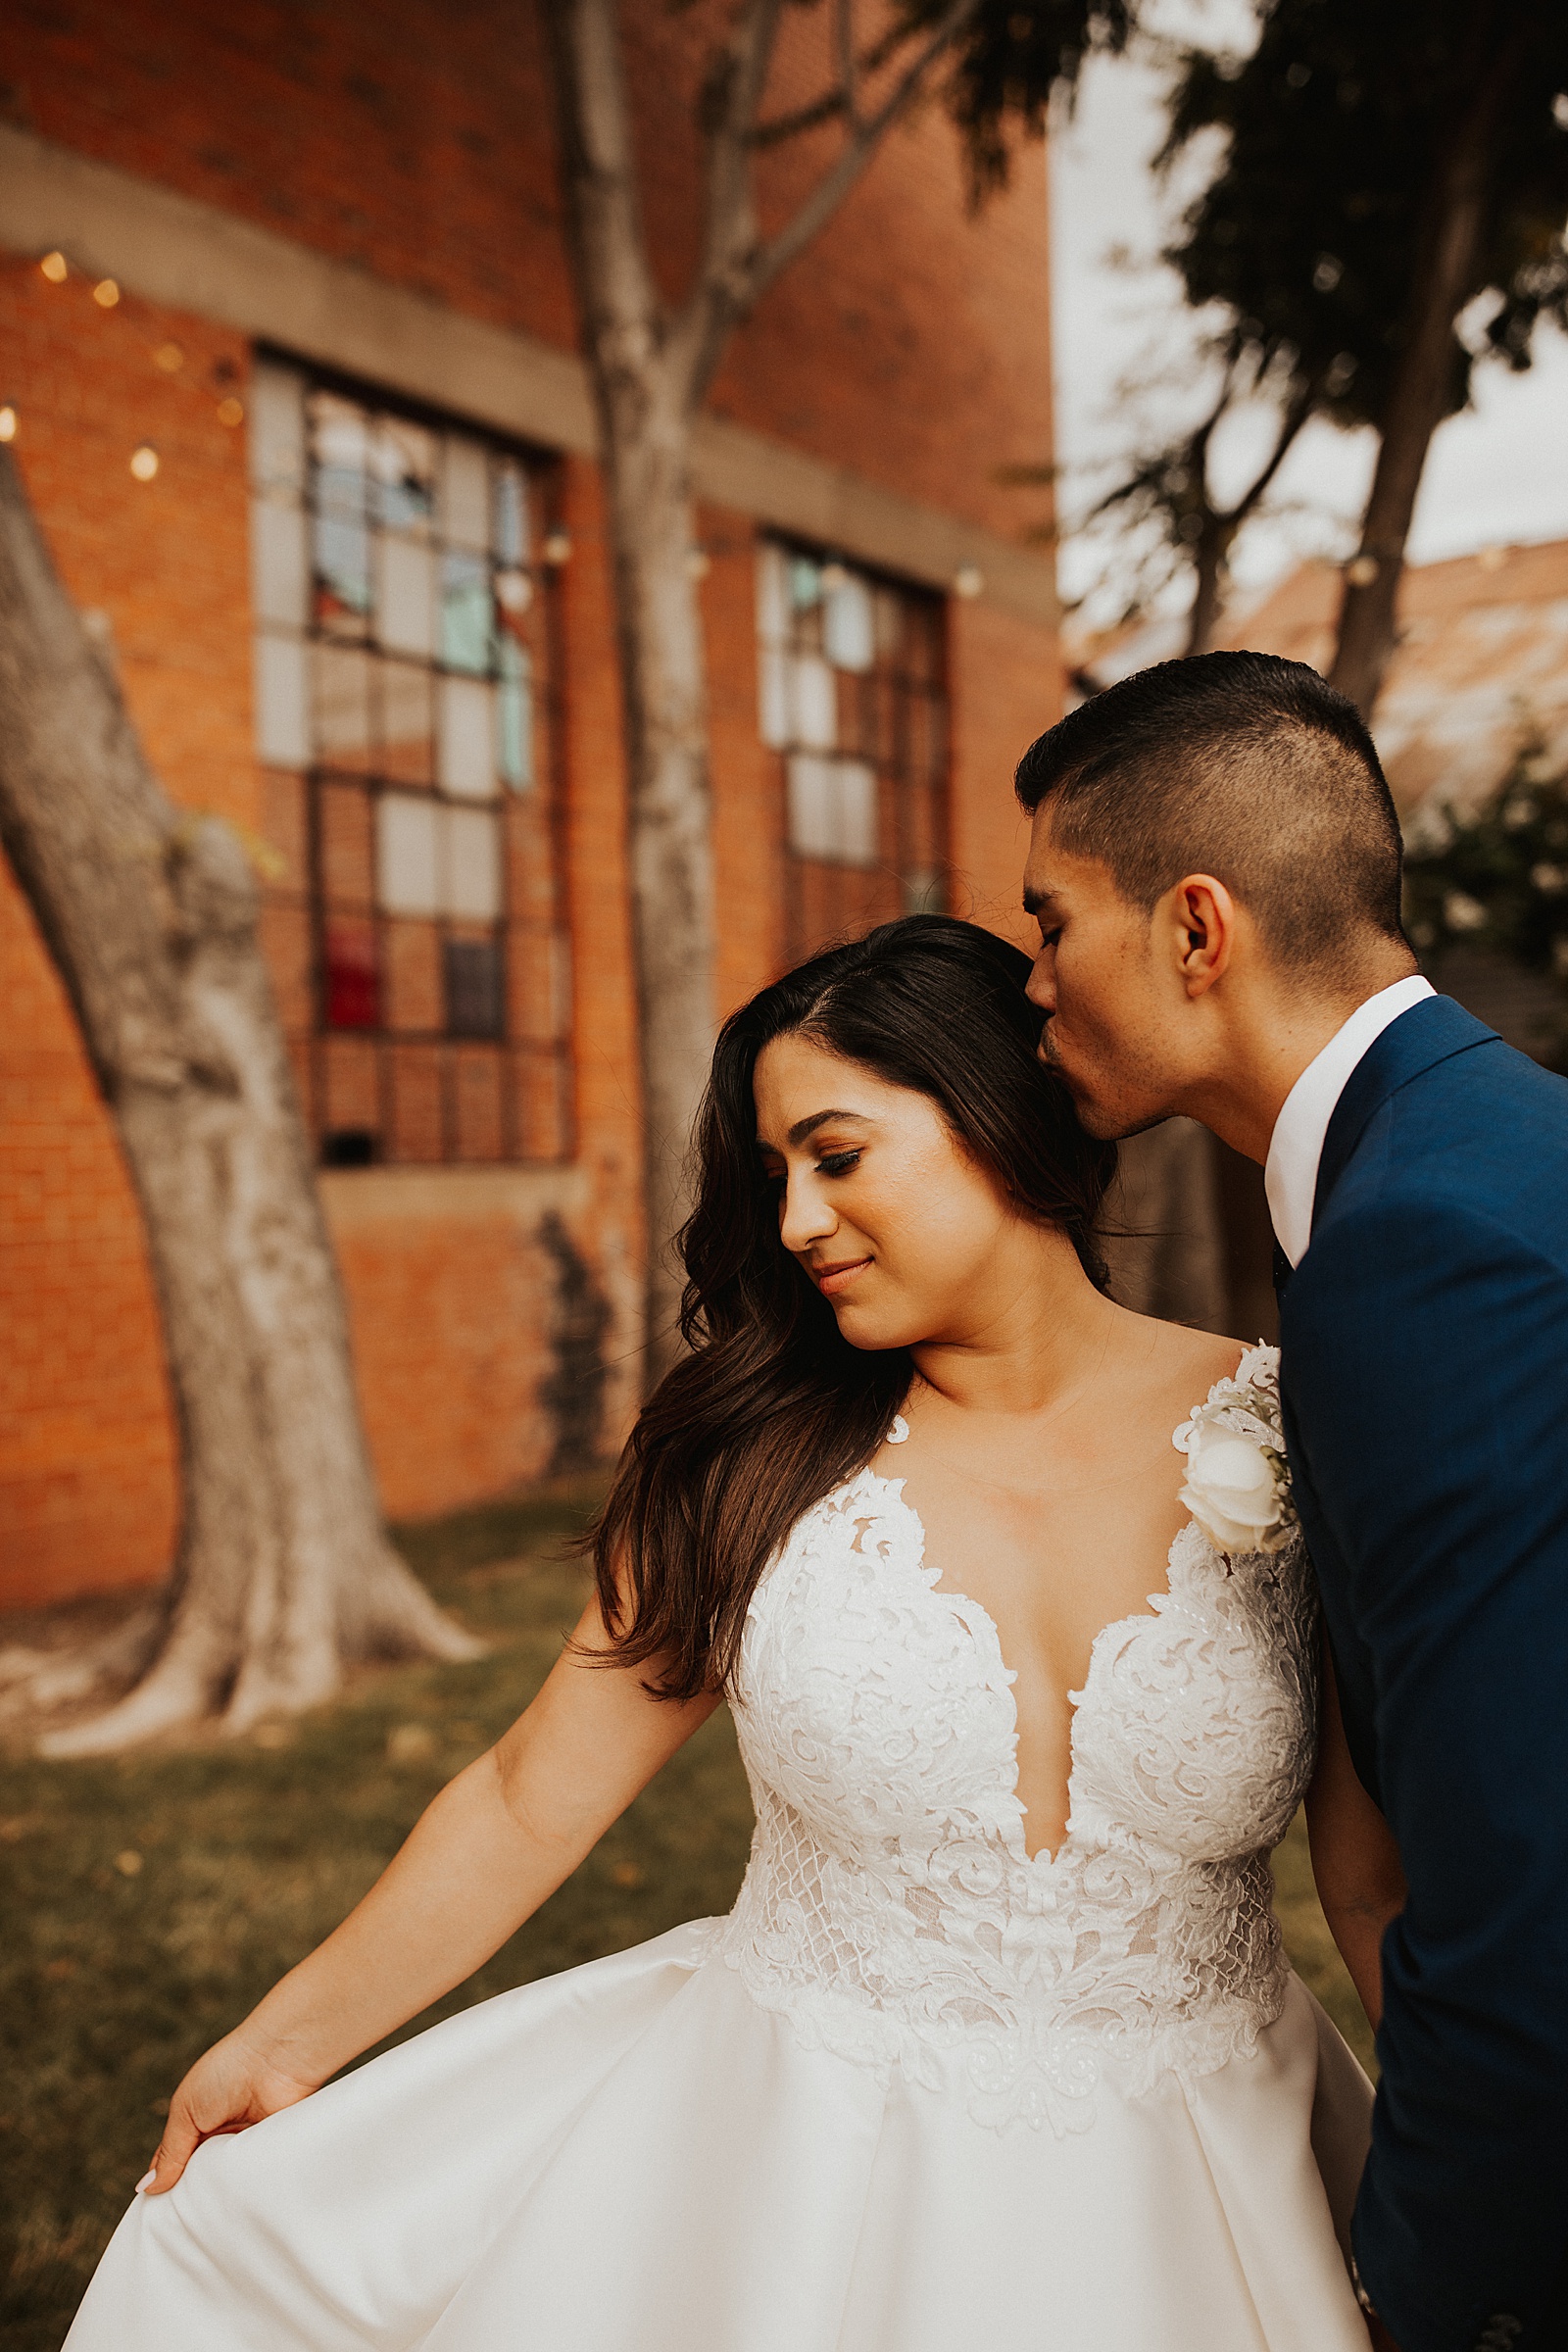 A bride and groom photo at the SoDa District Courtyard in Abilene, TX.